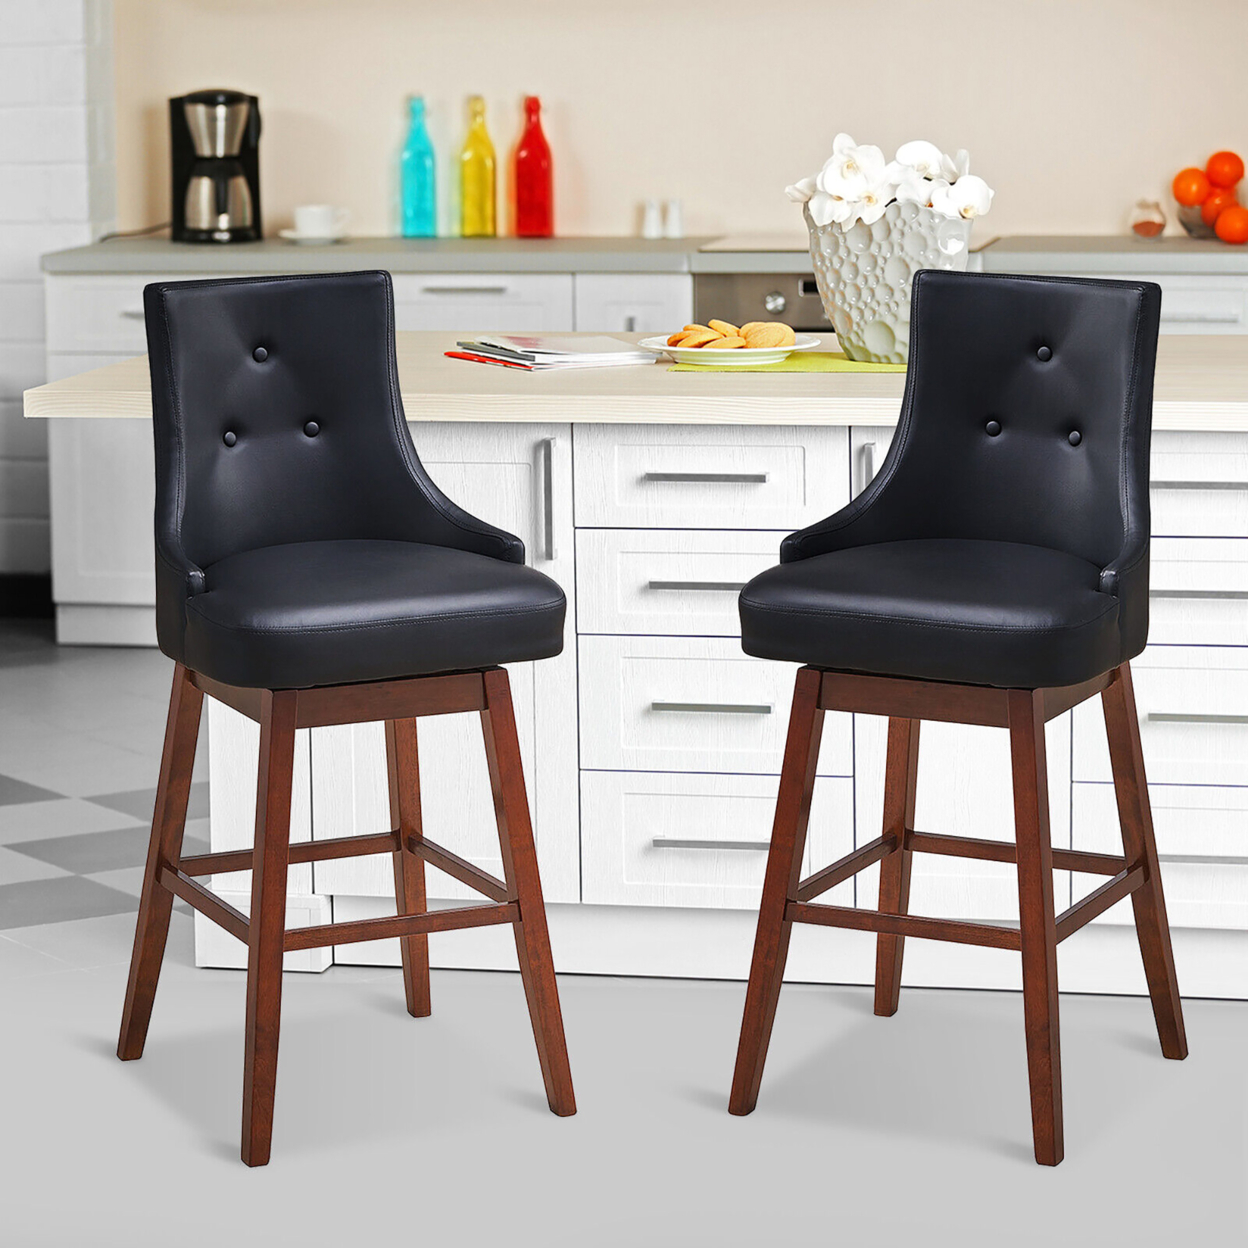 Set Of 2 Swivel Bar Stools 29'' Pub Height Upholstered Chairs W/ Rubber Wood Legs